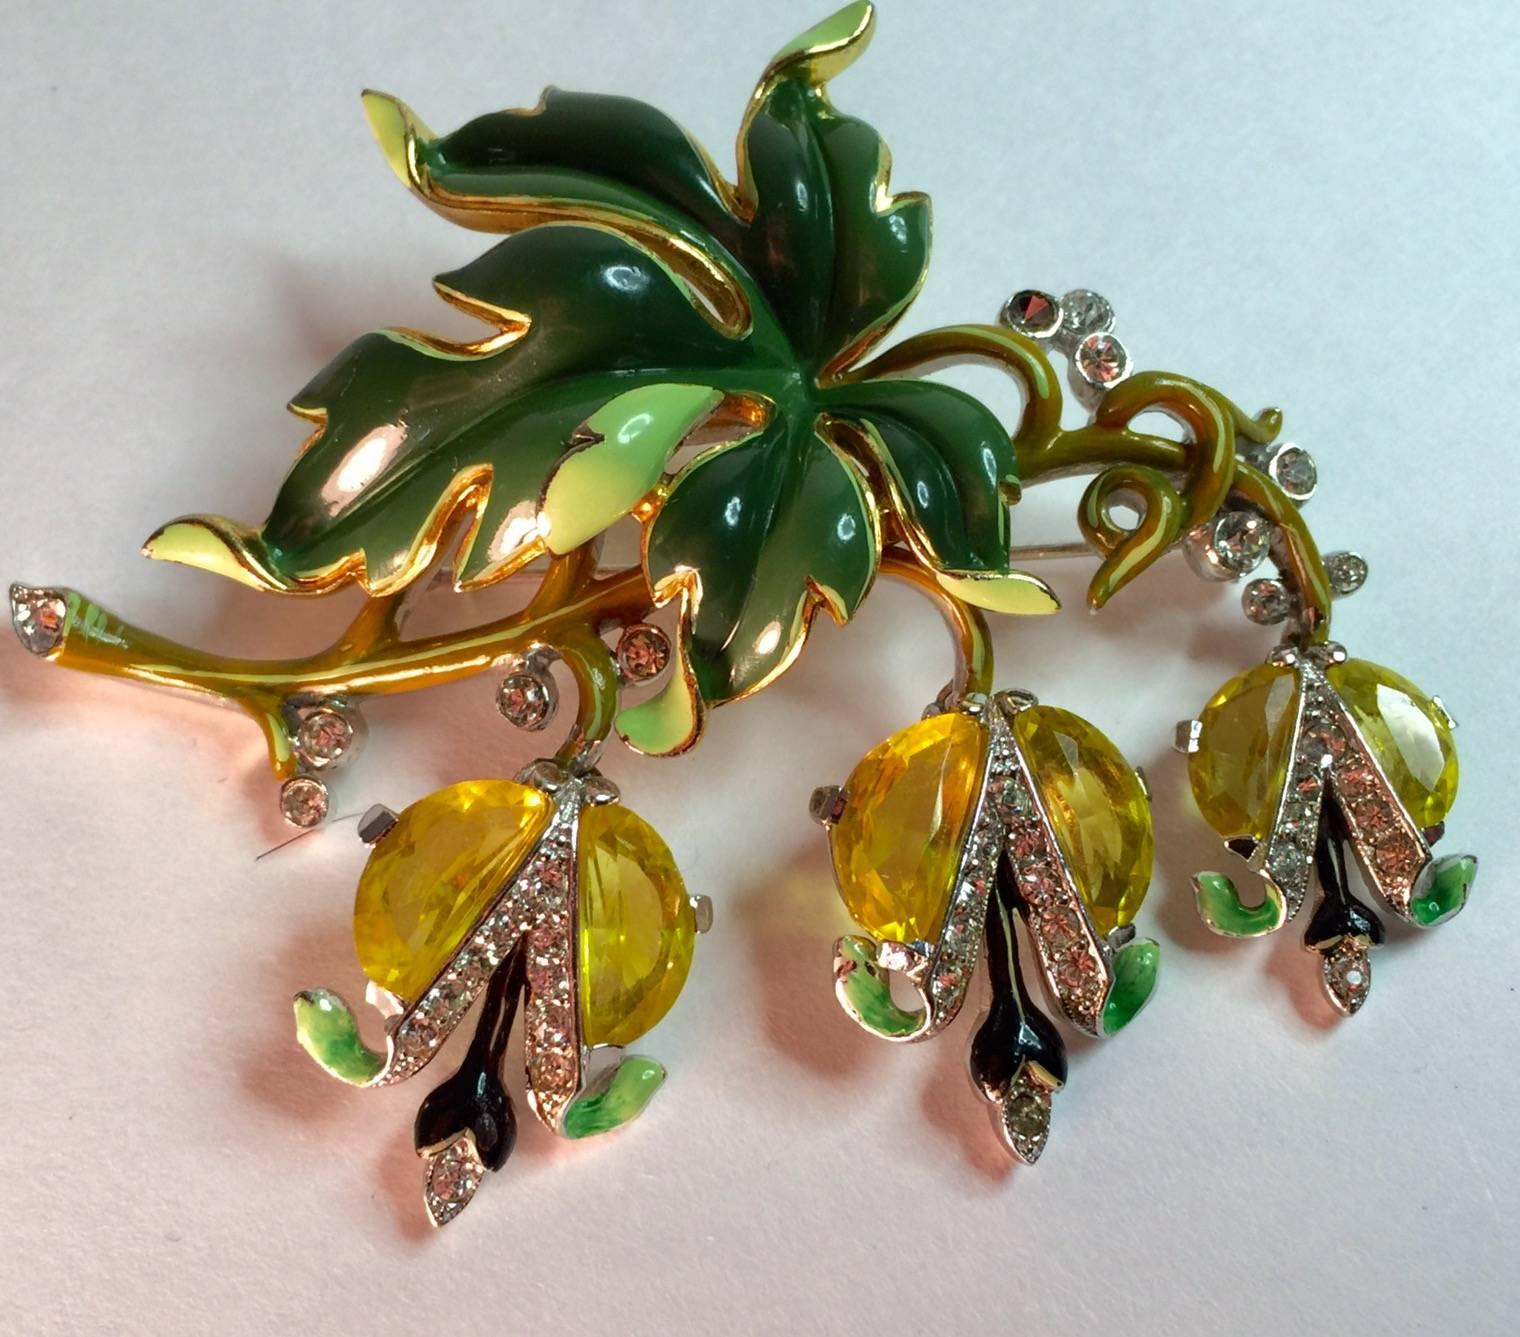 An amazing 1940s Rare and IMPORANT  TRIFARI Demilune Parure Enameled Bracelet  with coordinate Drop Pin and matching Clip Earrings suite offered here as a group, as the rarity of this suite demands the items stay together as an investment museum